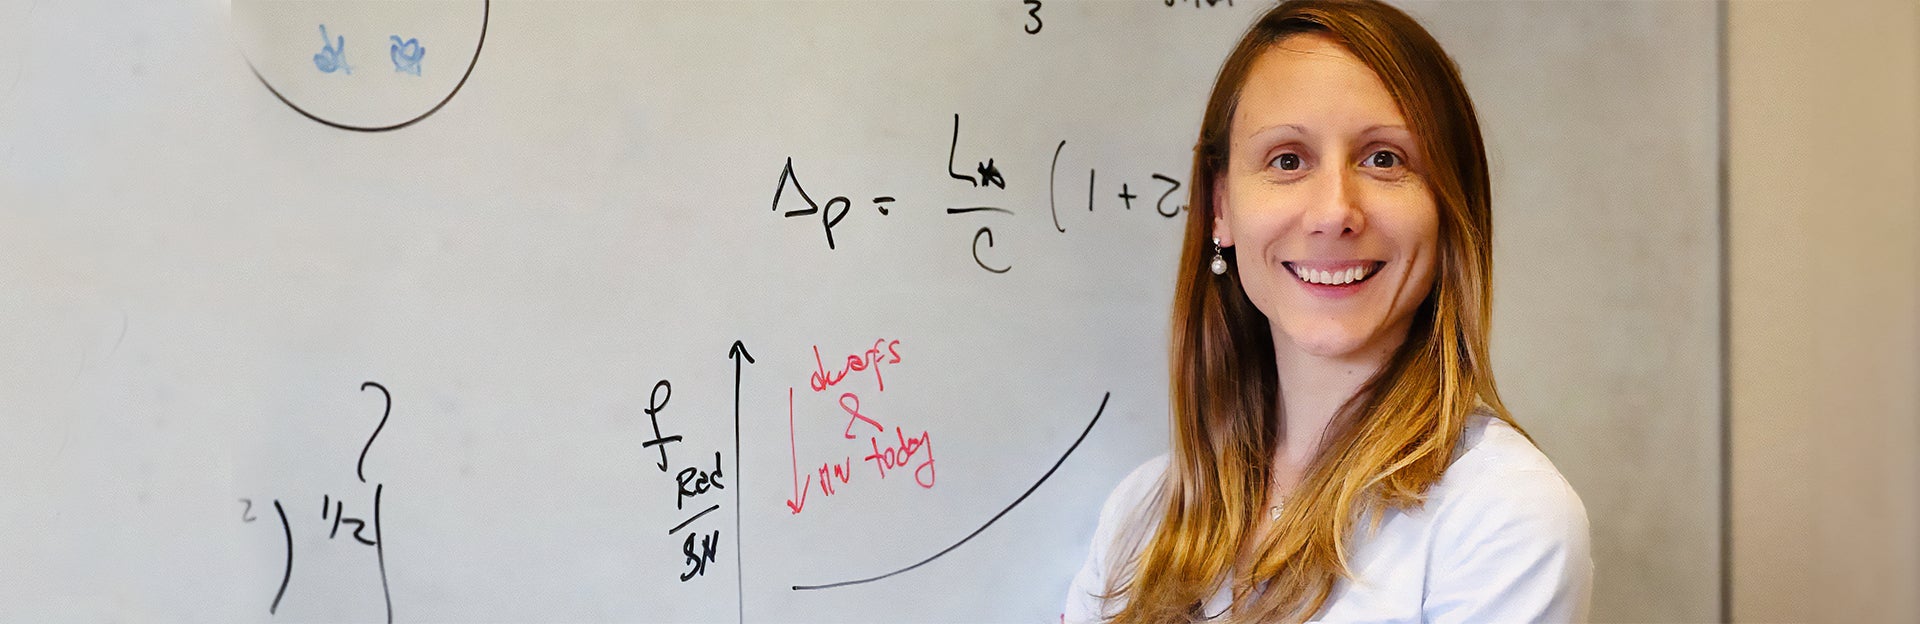 Frontiers of Cosmology Lecture with Professor Laura Sales